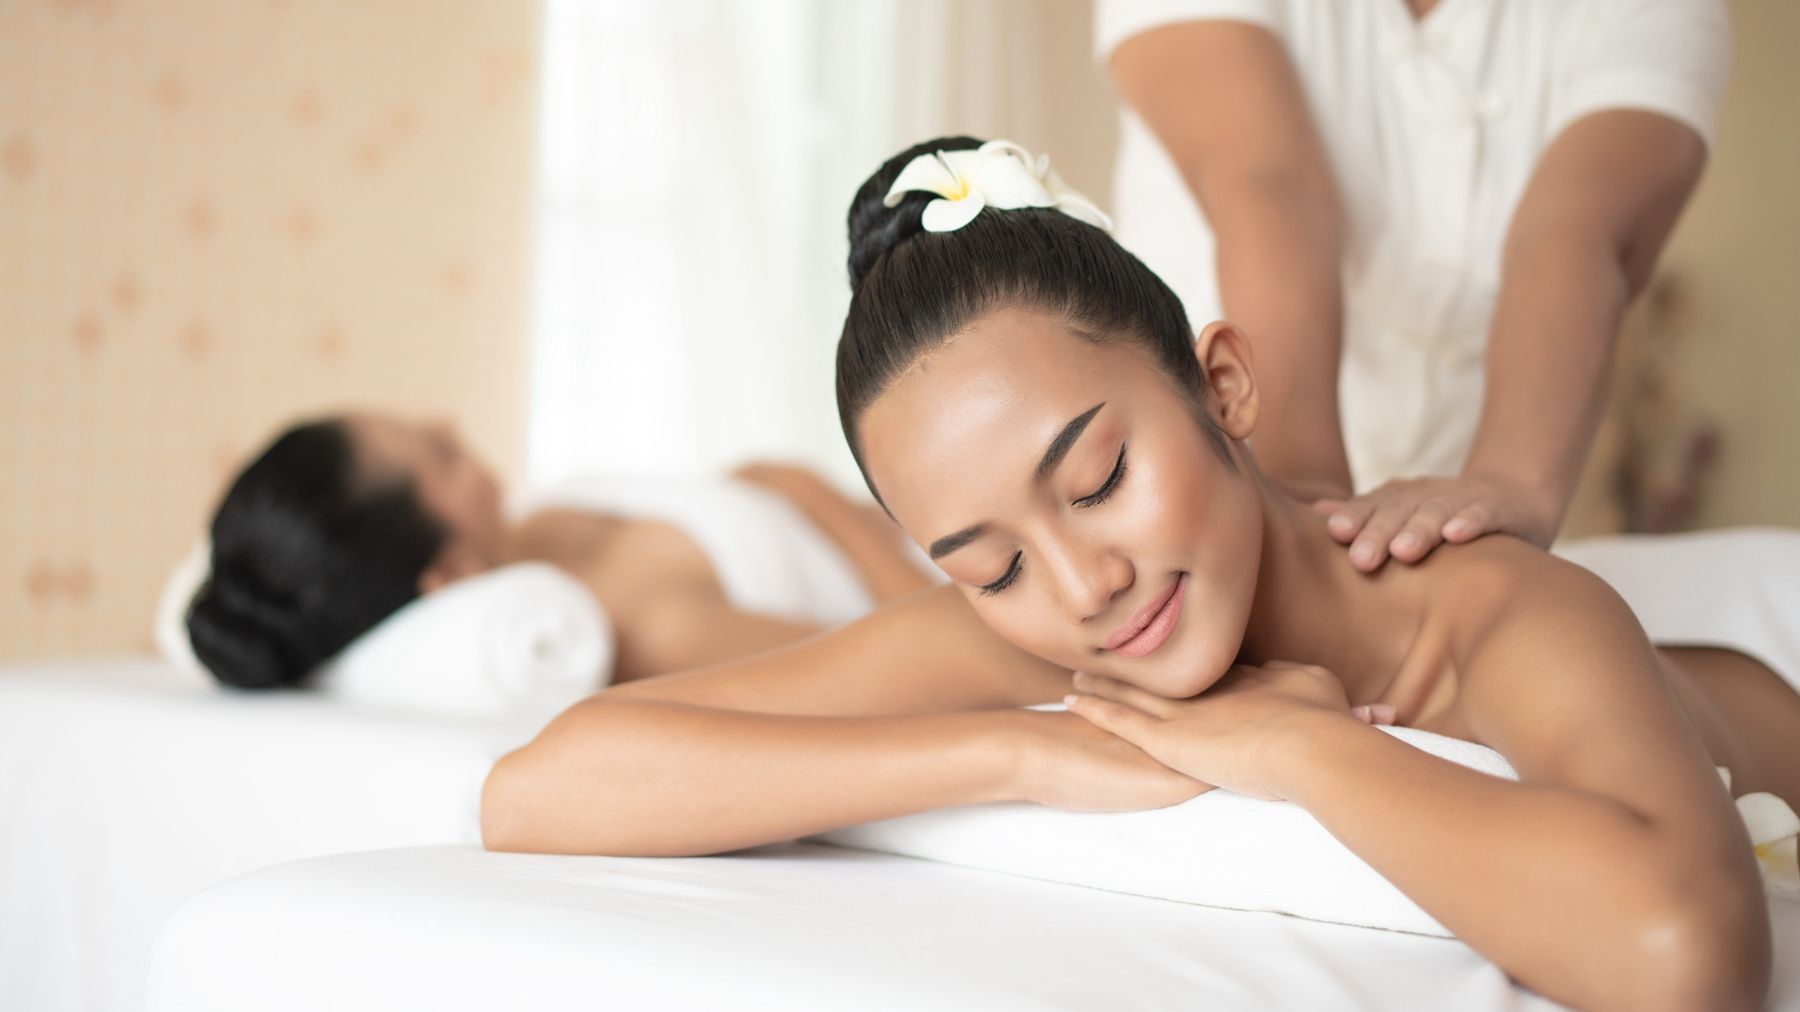 Originating in India and practiced in Thailand for centuries, the massage w...